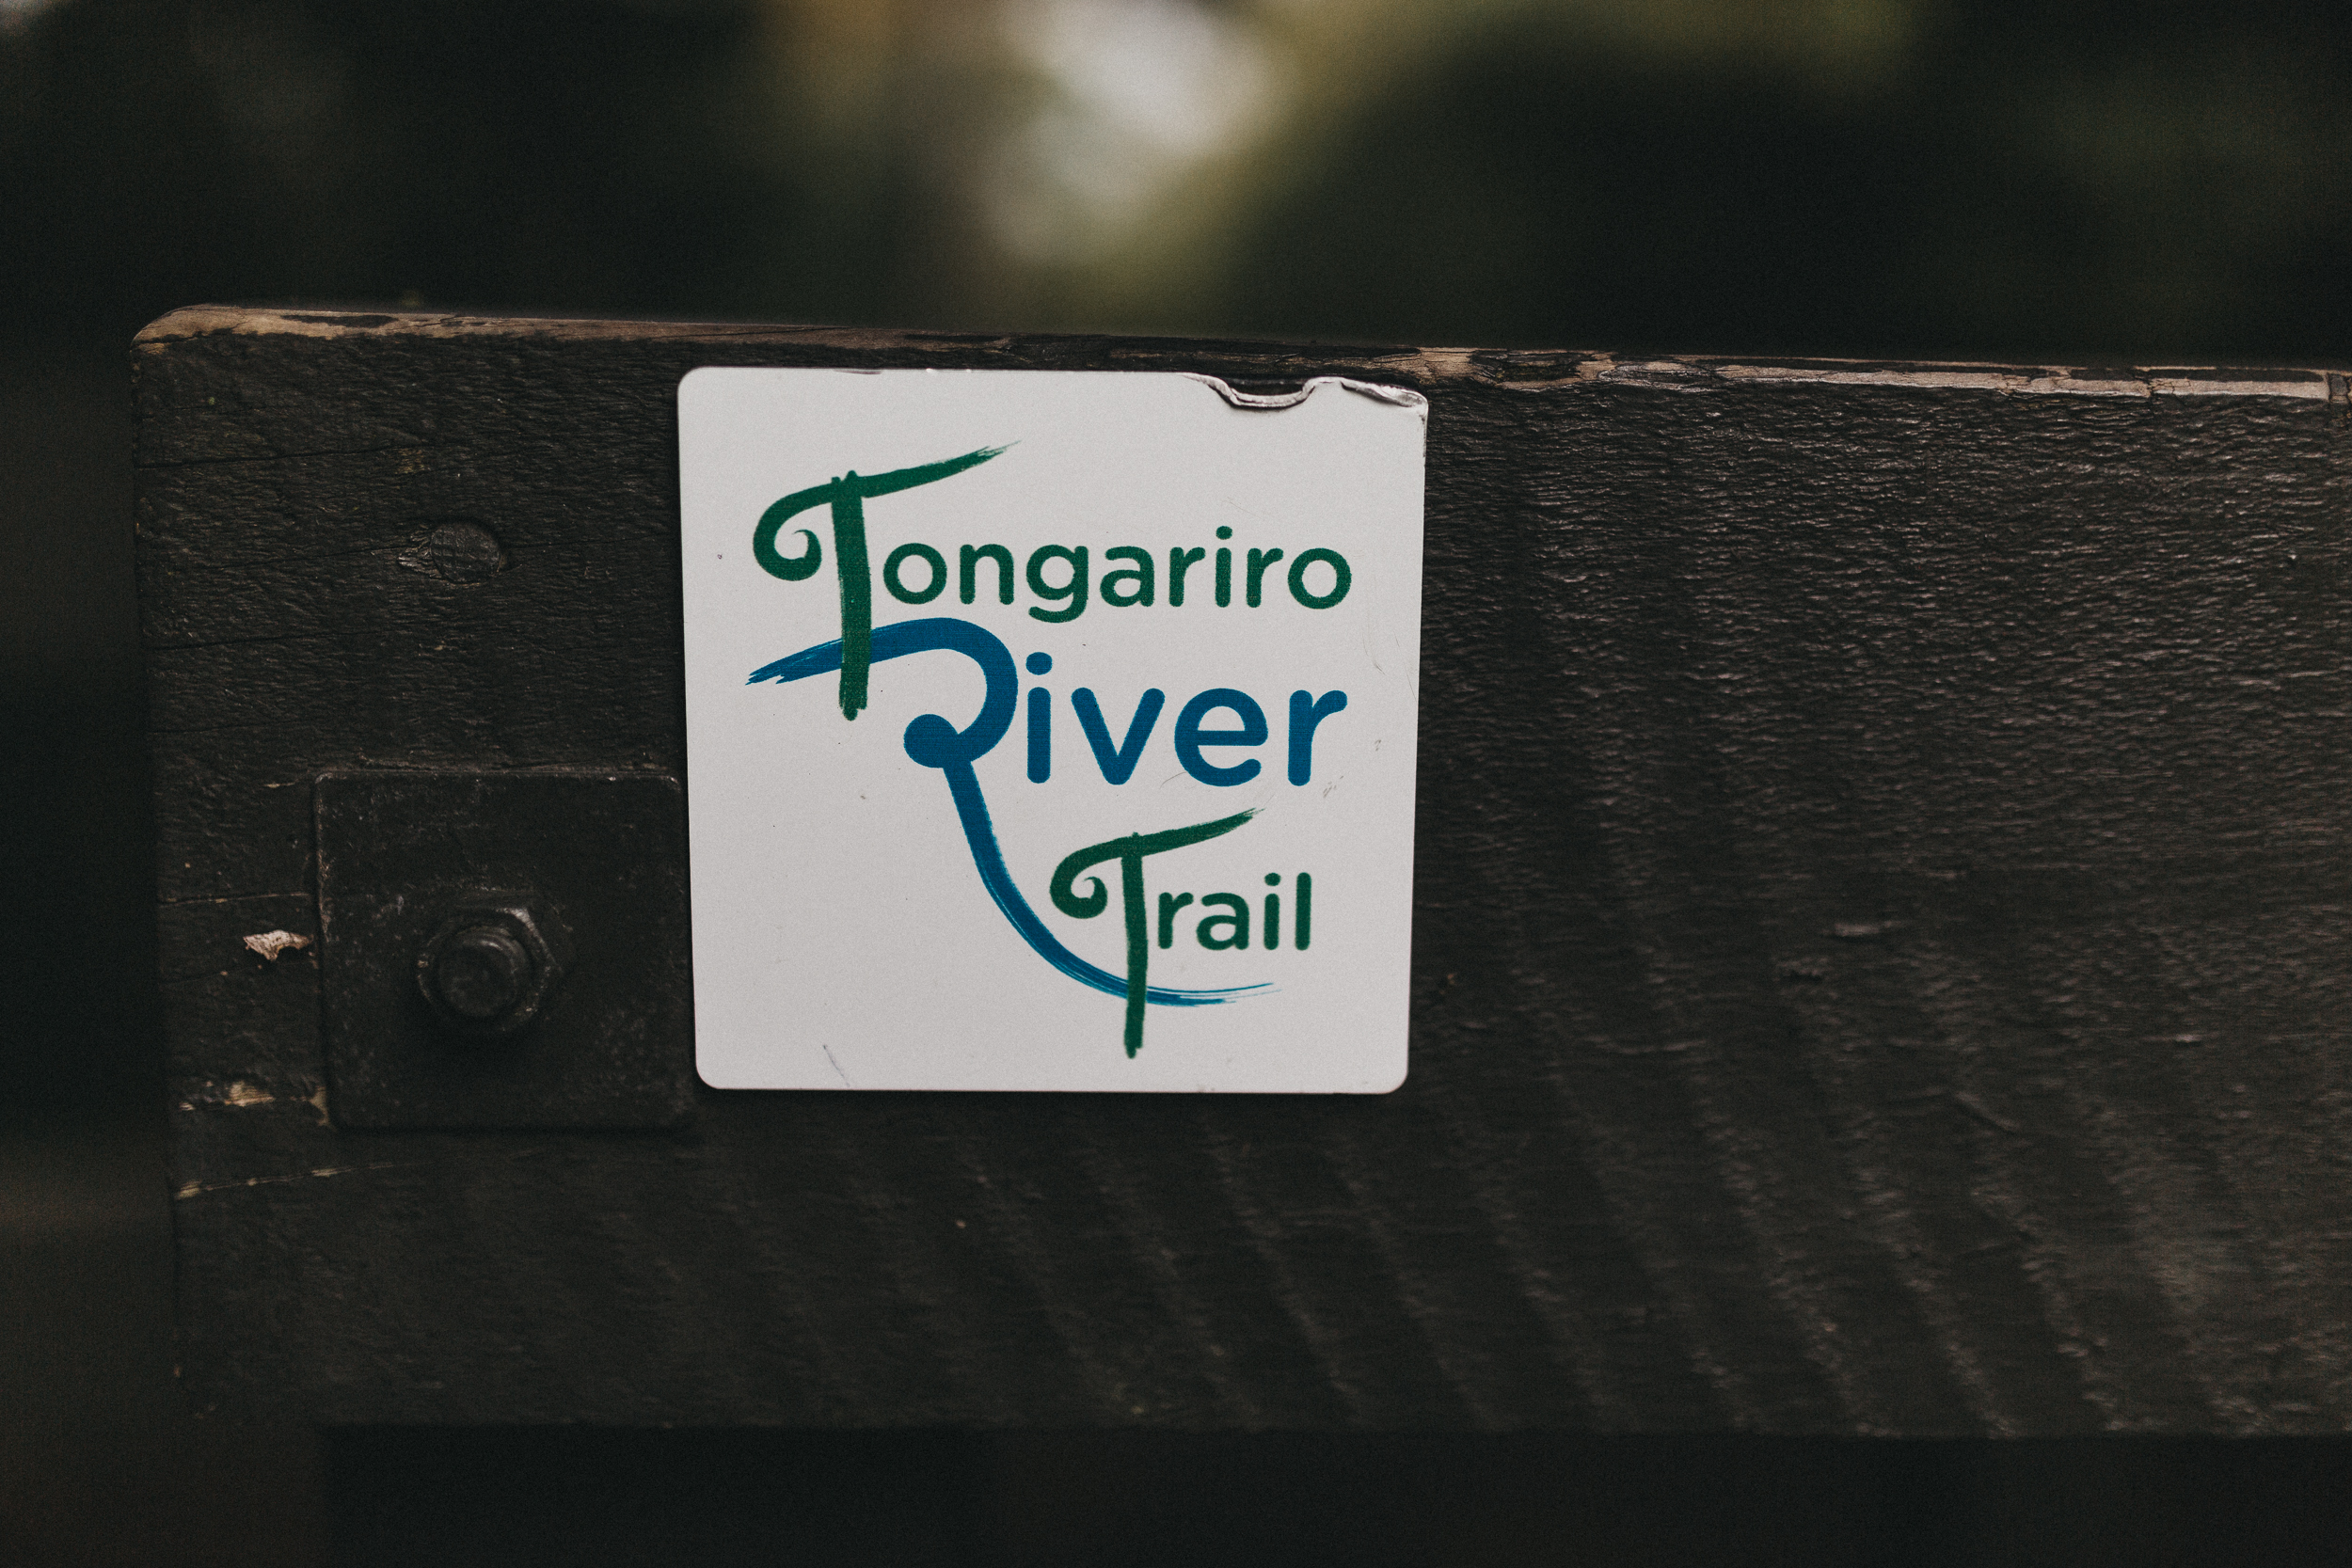 Day Two: the Tongariro River trail departing from Turangi, an easy walk along the river (10 min drive from Pukawa Bay).